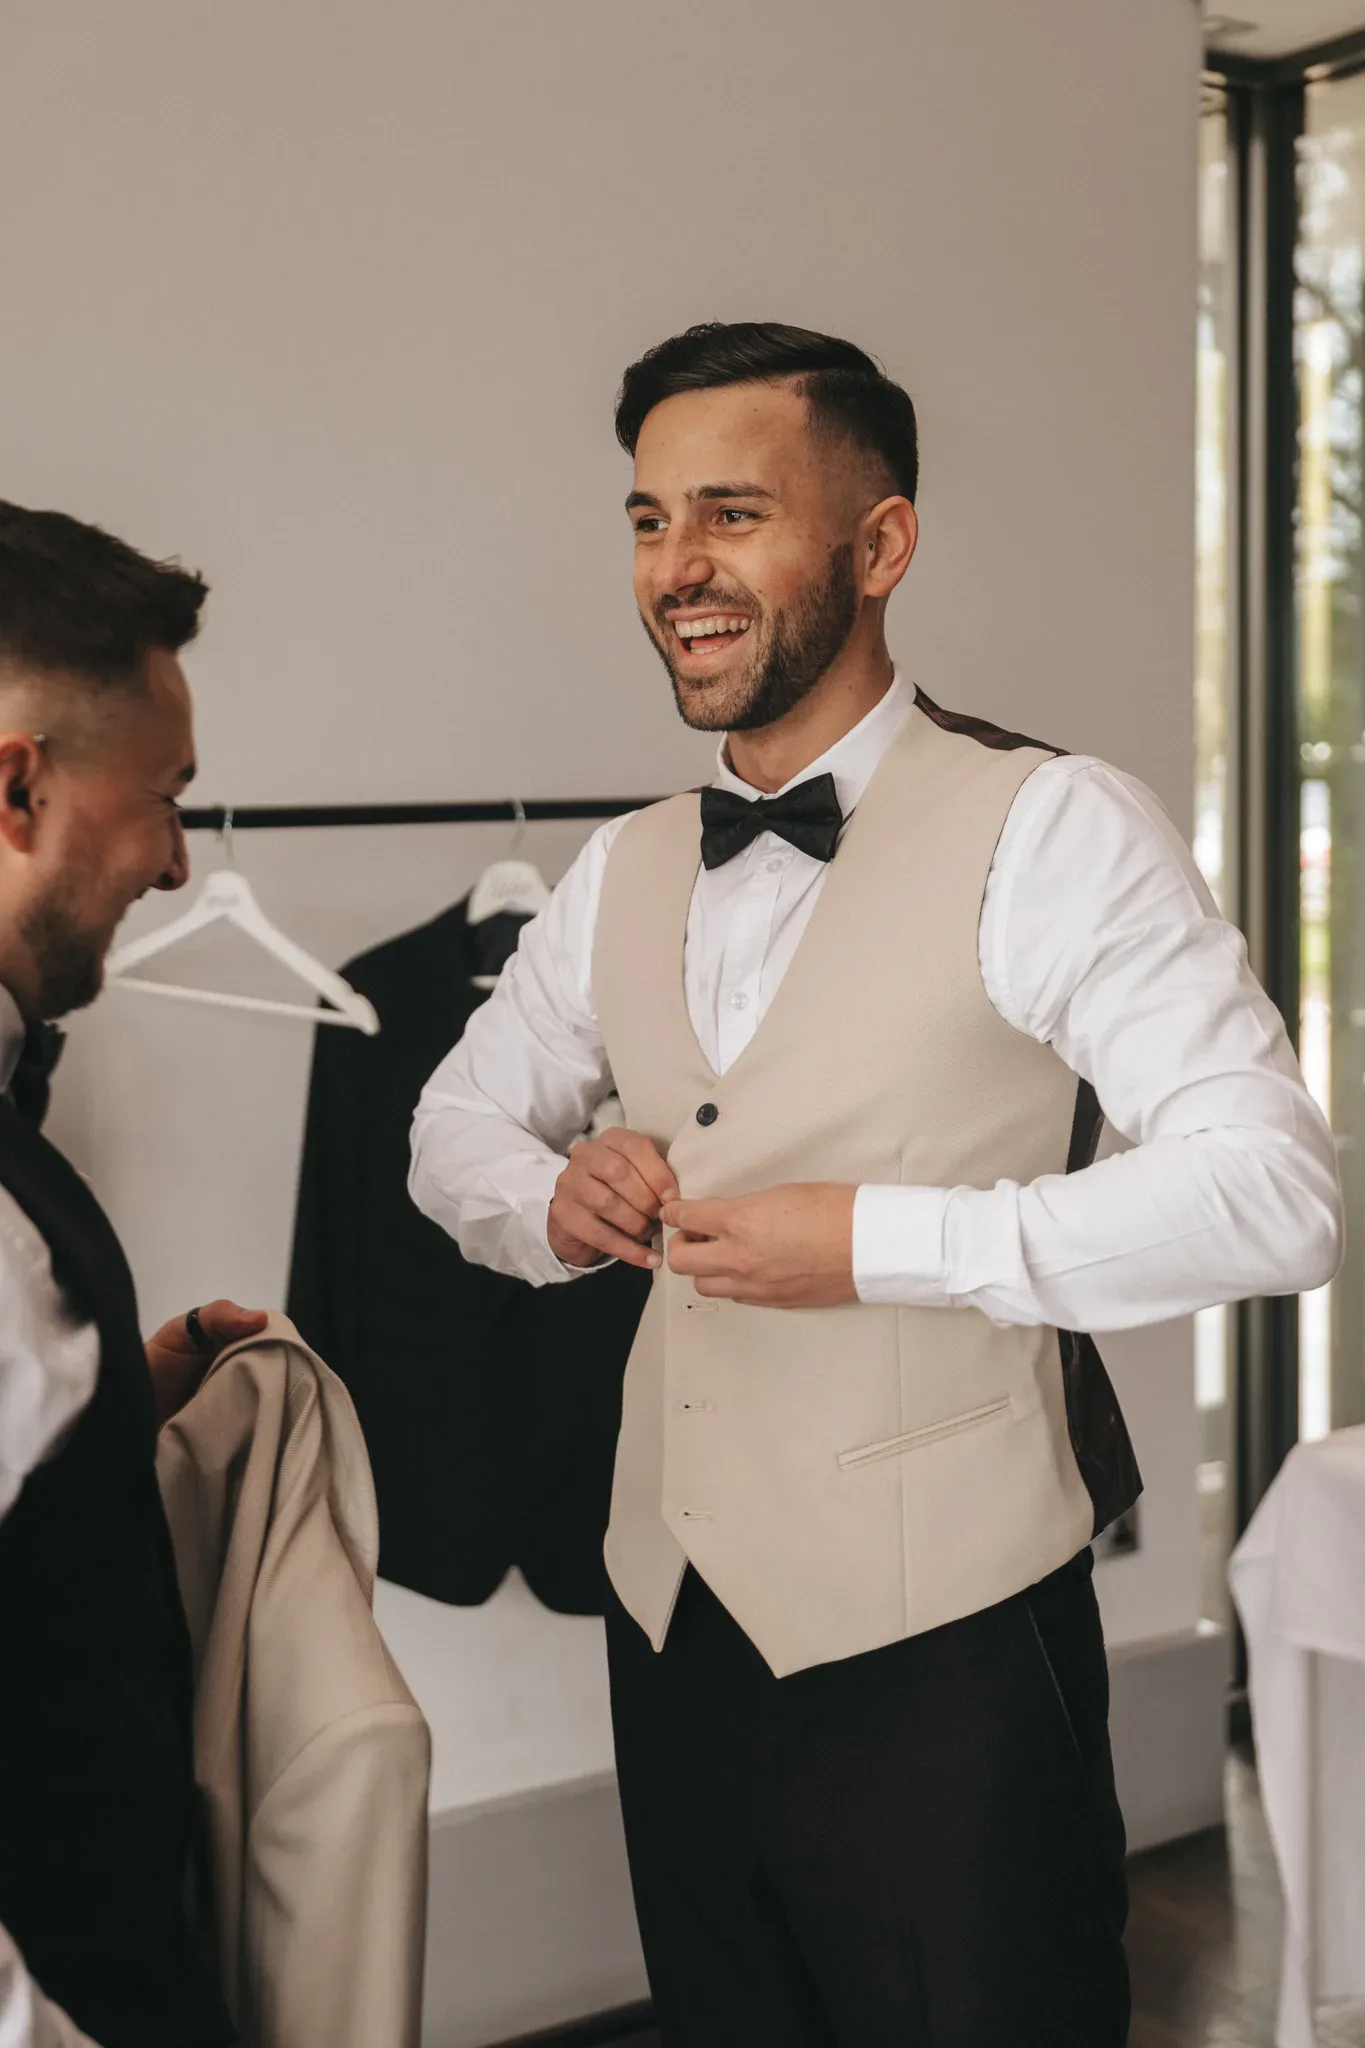 A joyful groom in a beige vest and white shirt smiles broadly, adjusting his black bow tie, with his reflection visible in a mirror held by another man in the background. the setting suggests a well-lit room with a modern design.